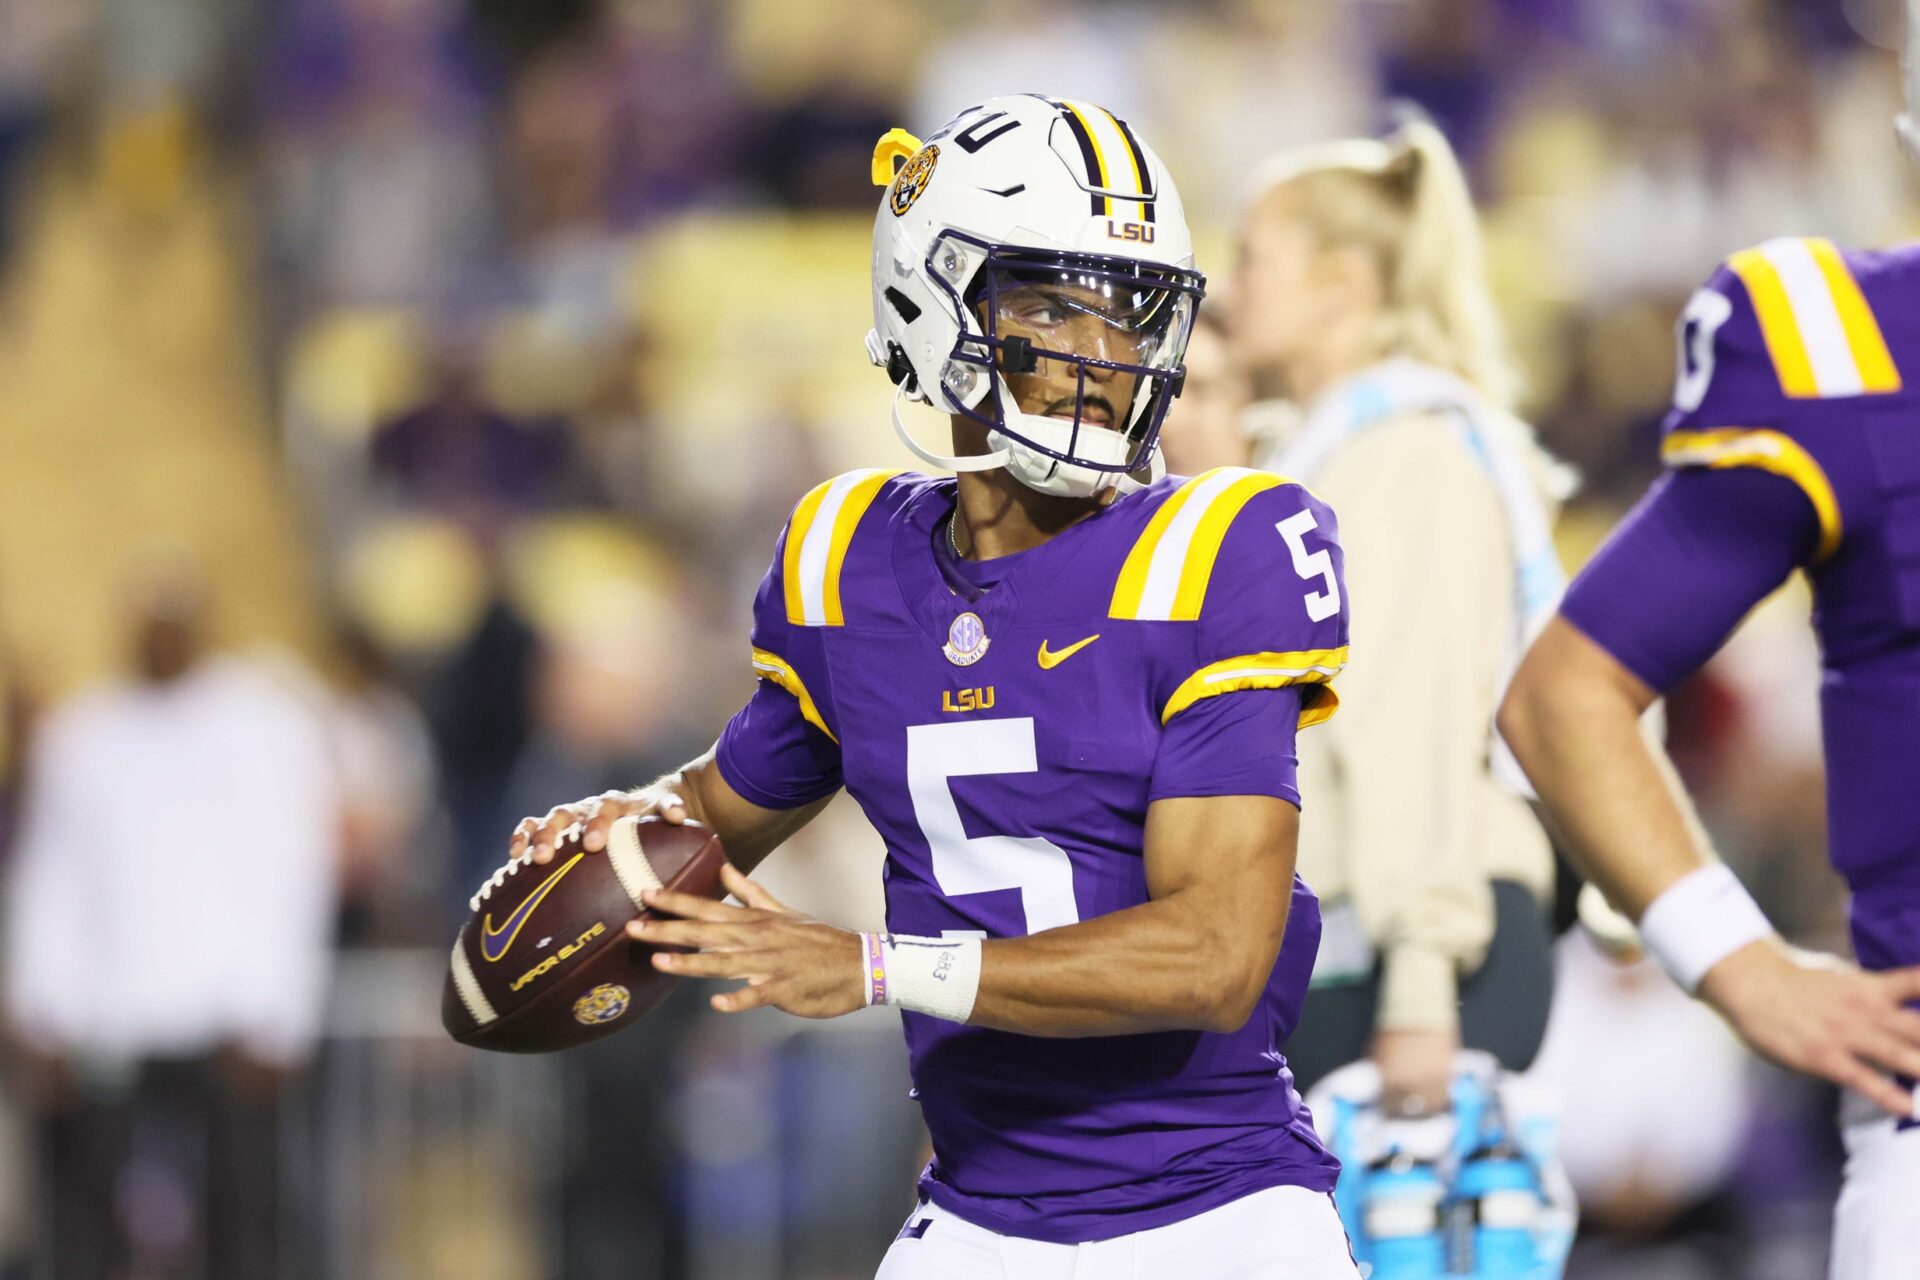 Heisman Trophy candidate LSU Tigers quarterback Jayden Daniels (5) warms up before their game against the Georgia State Panthers at Tiger Stadium.